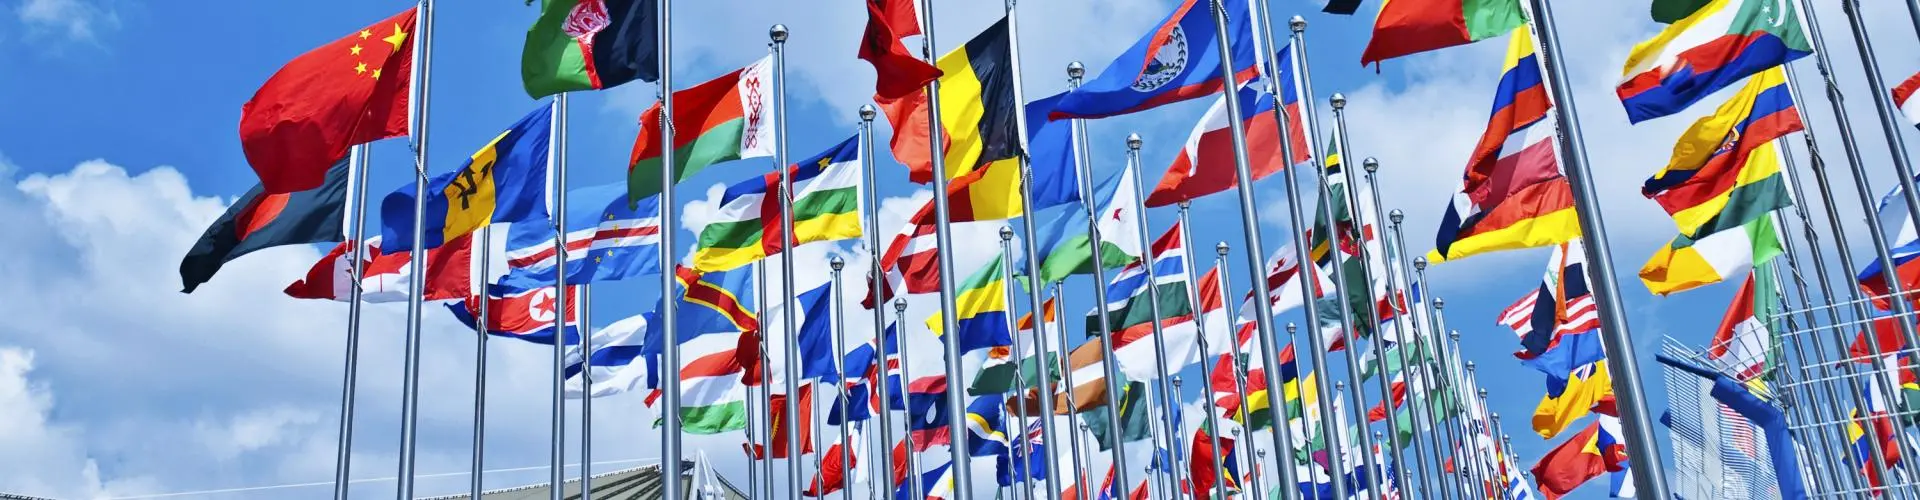 A collection of flags waving in the wind.